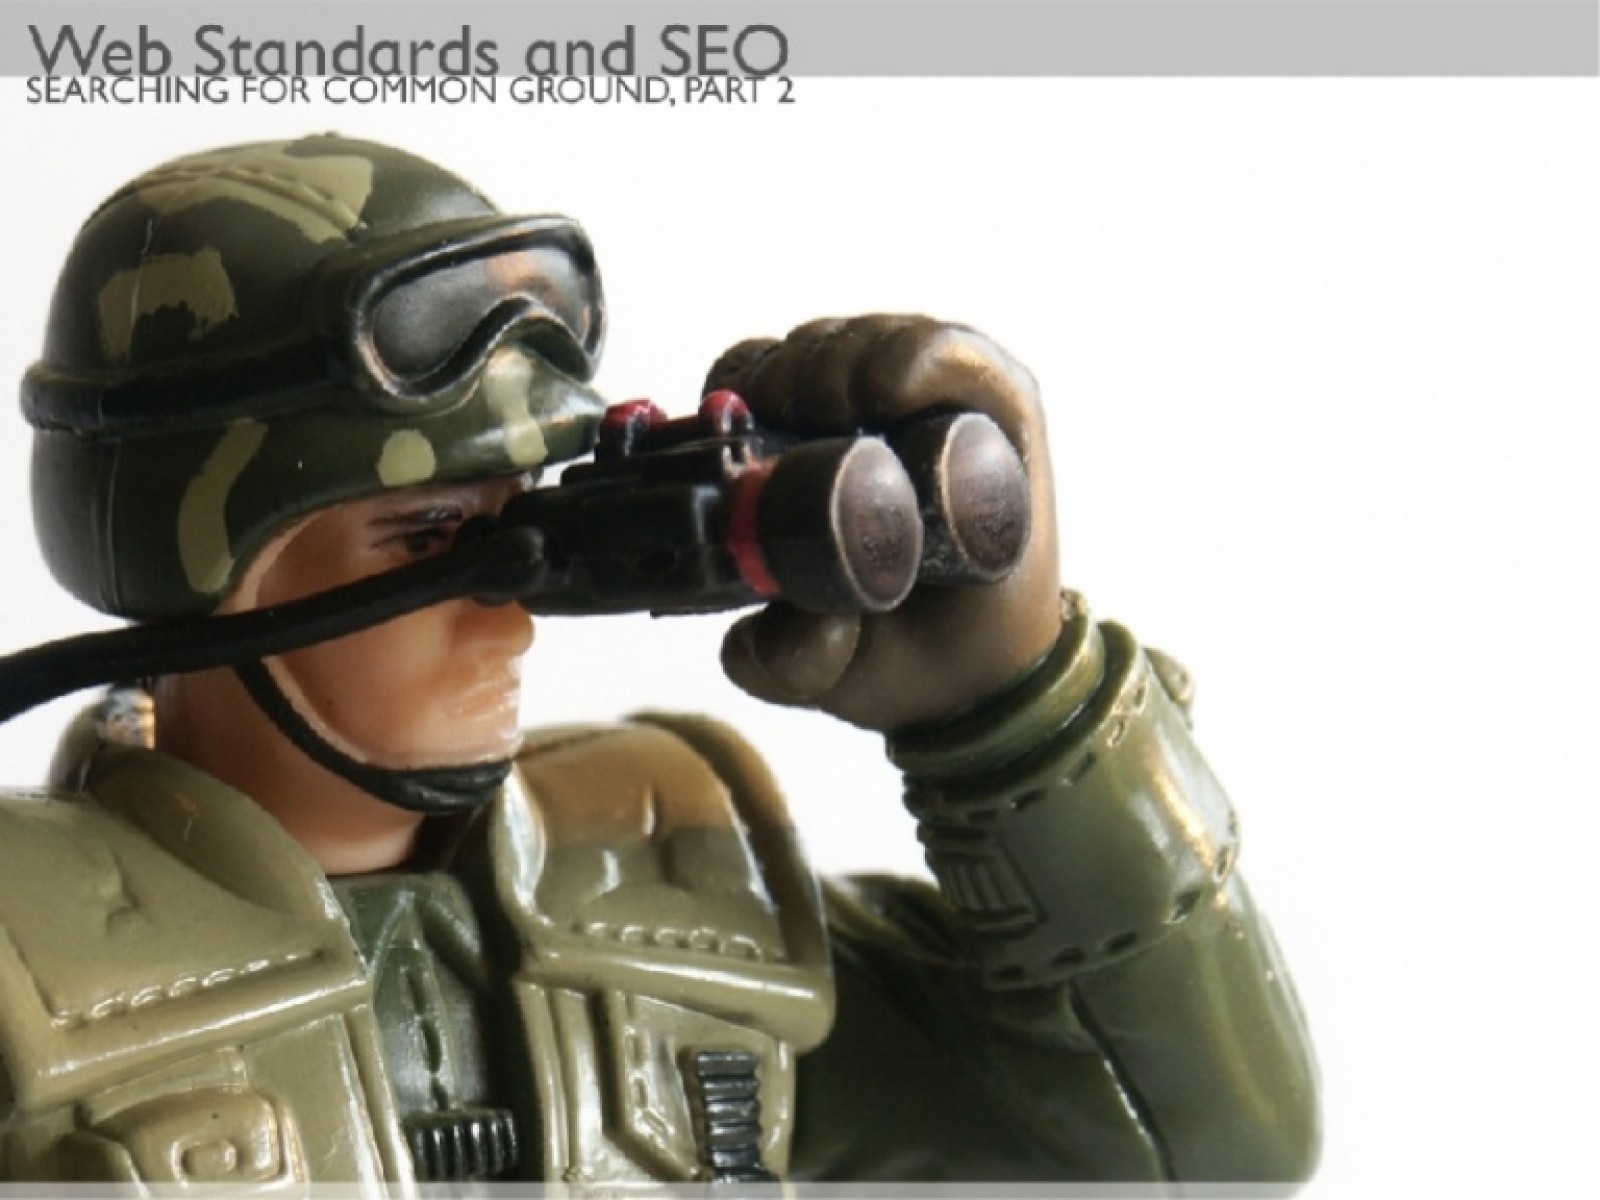 Web Standards and SEO